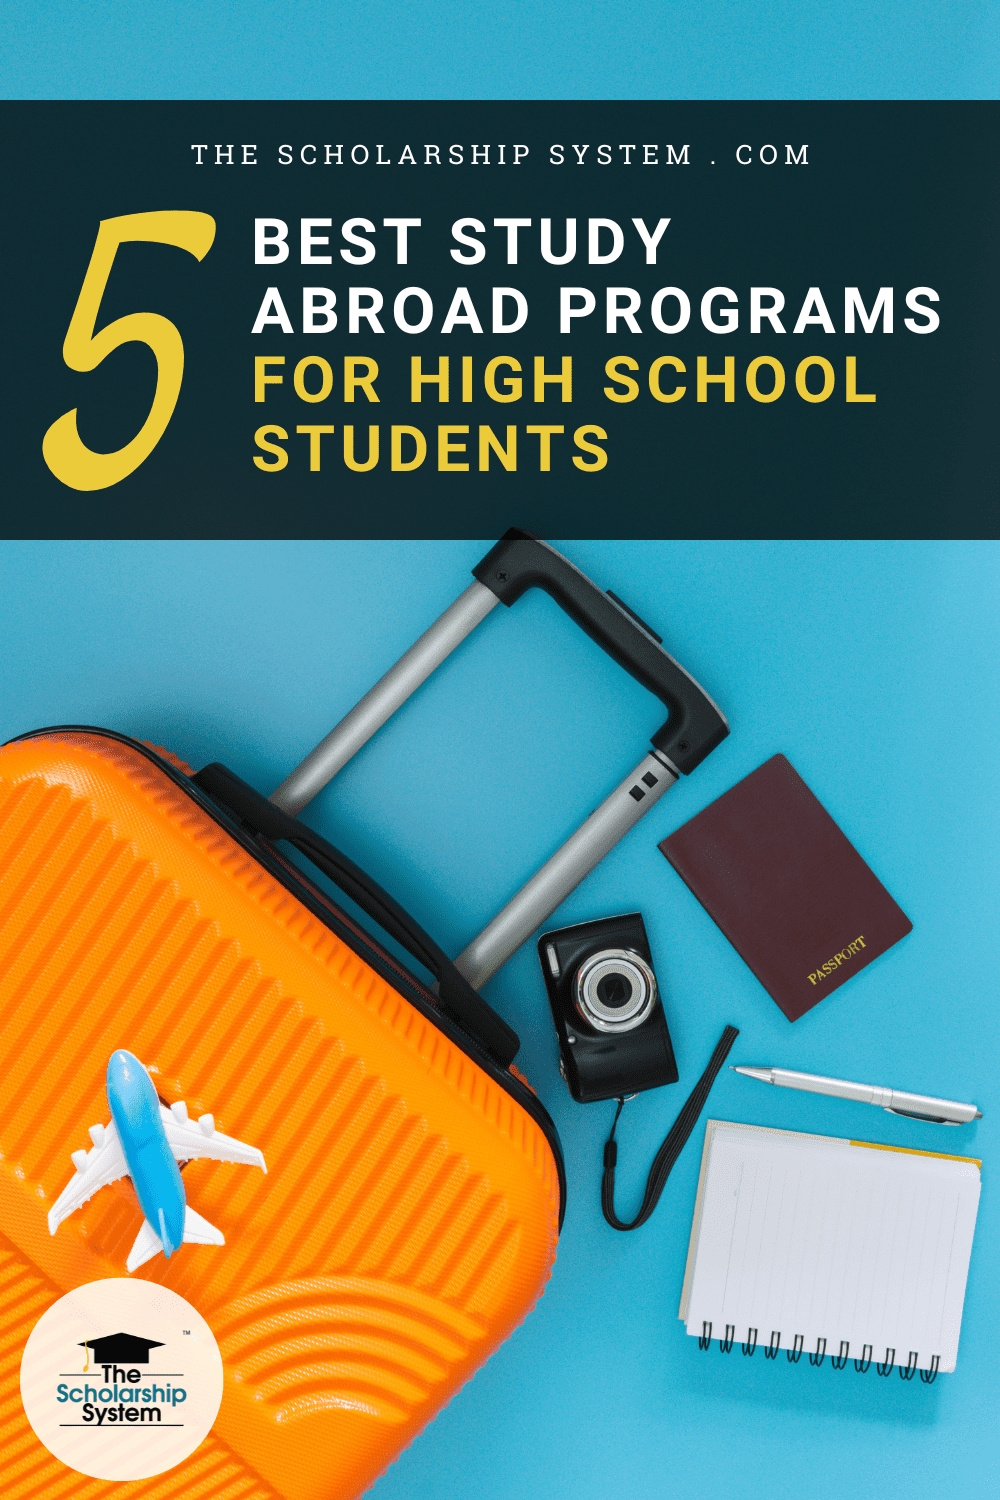 5 Best Study Abroad Programs for High School Students The Scholarship